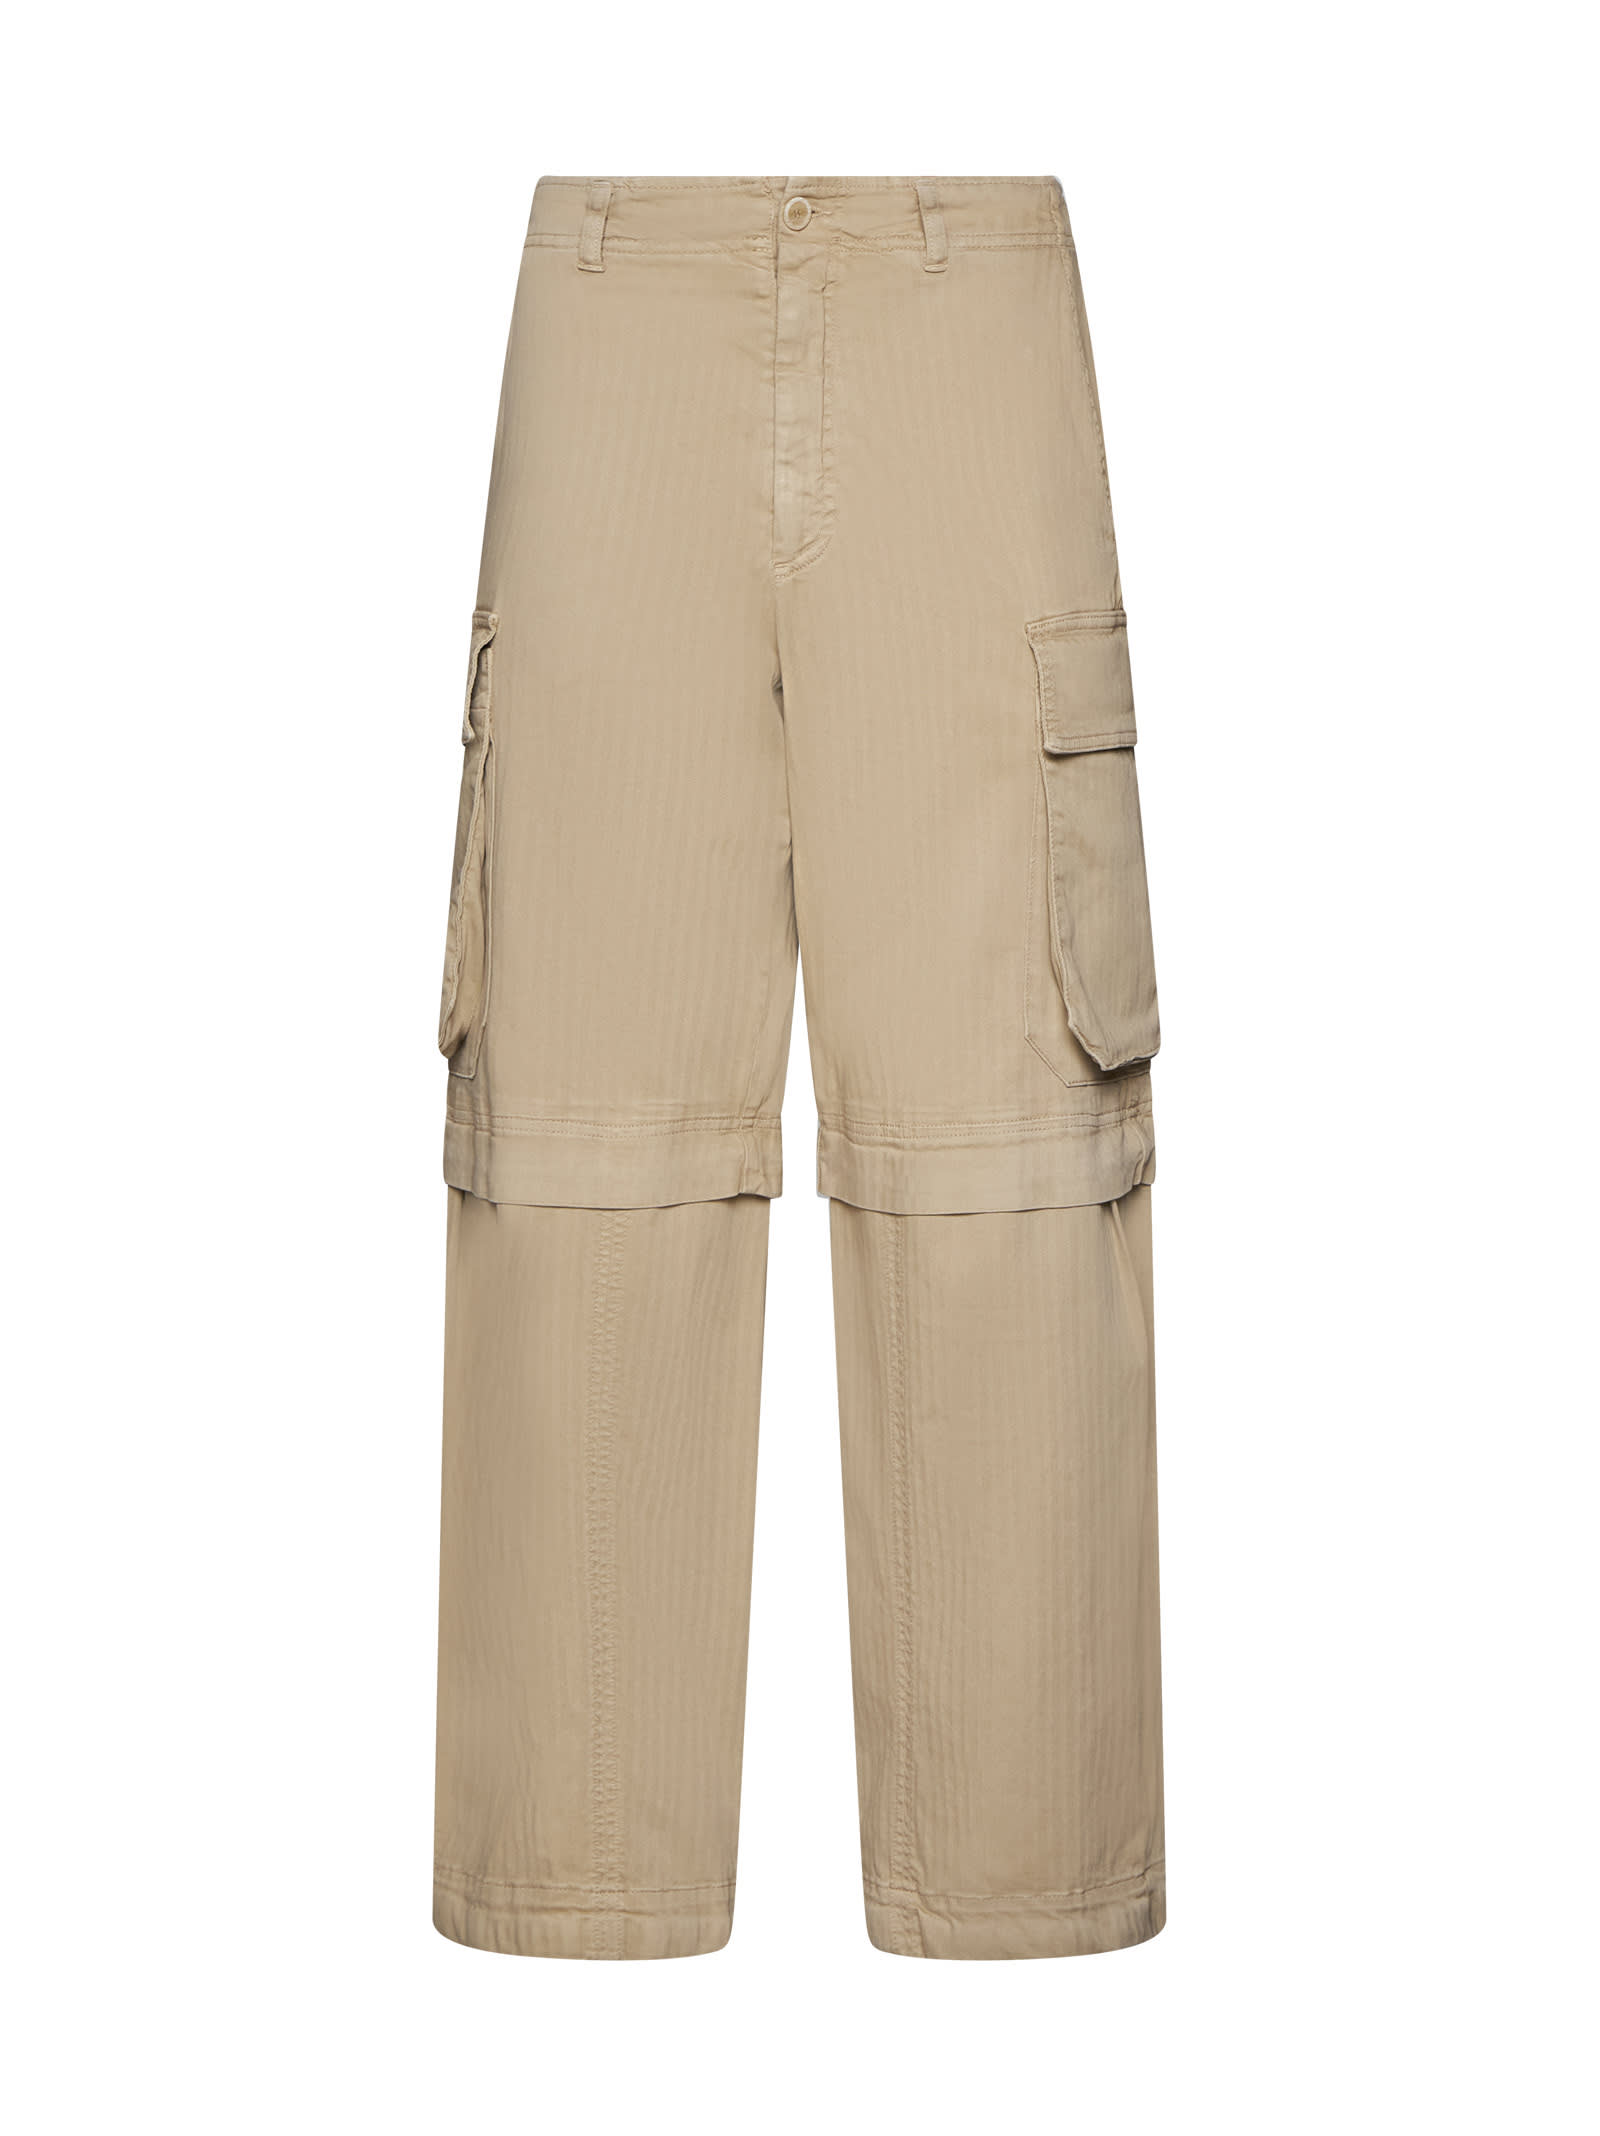 SEMICOUTURE Pants